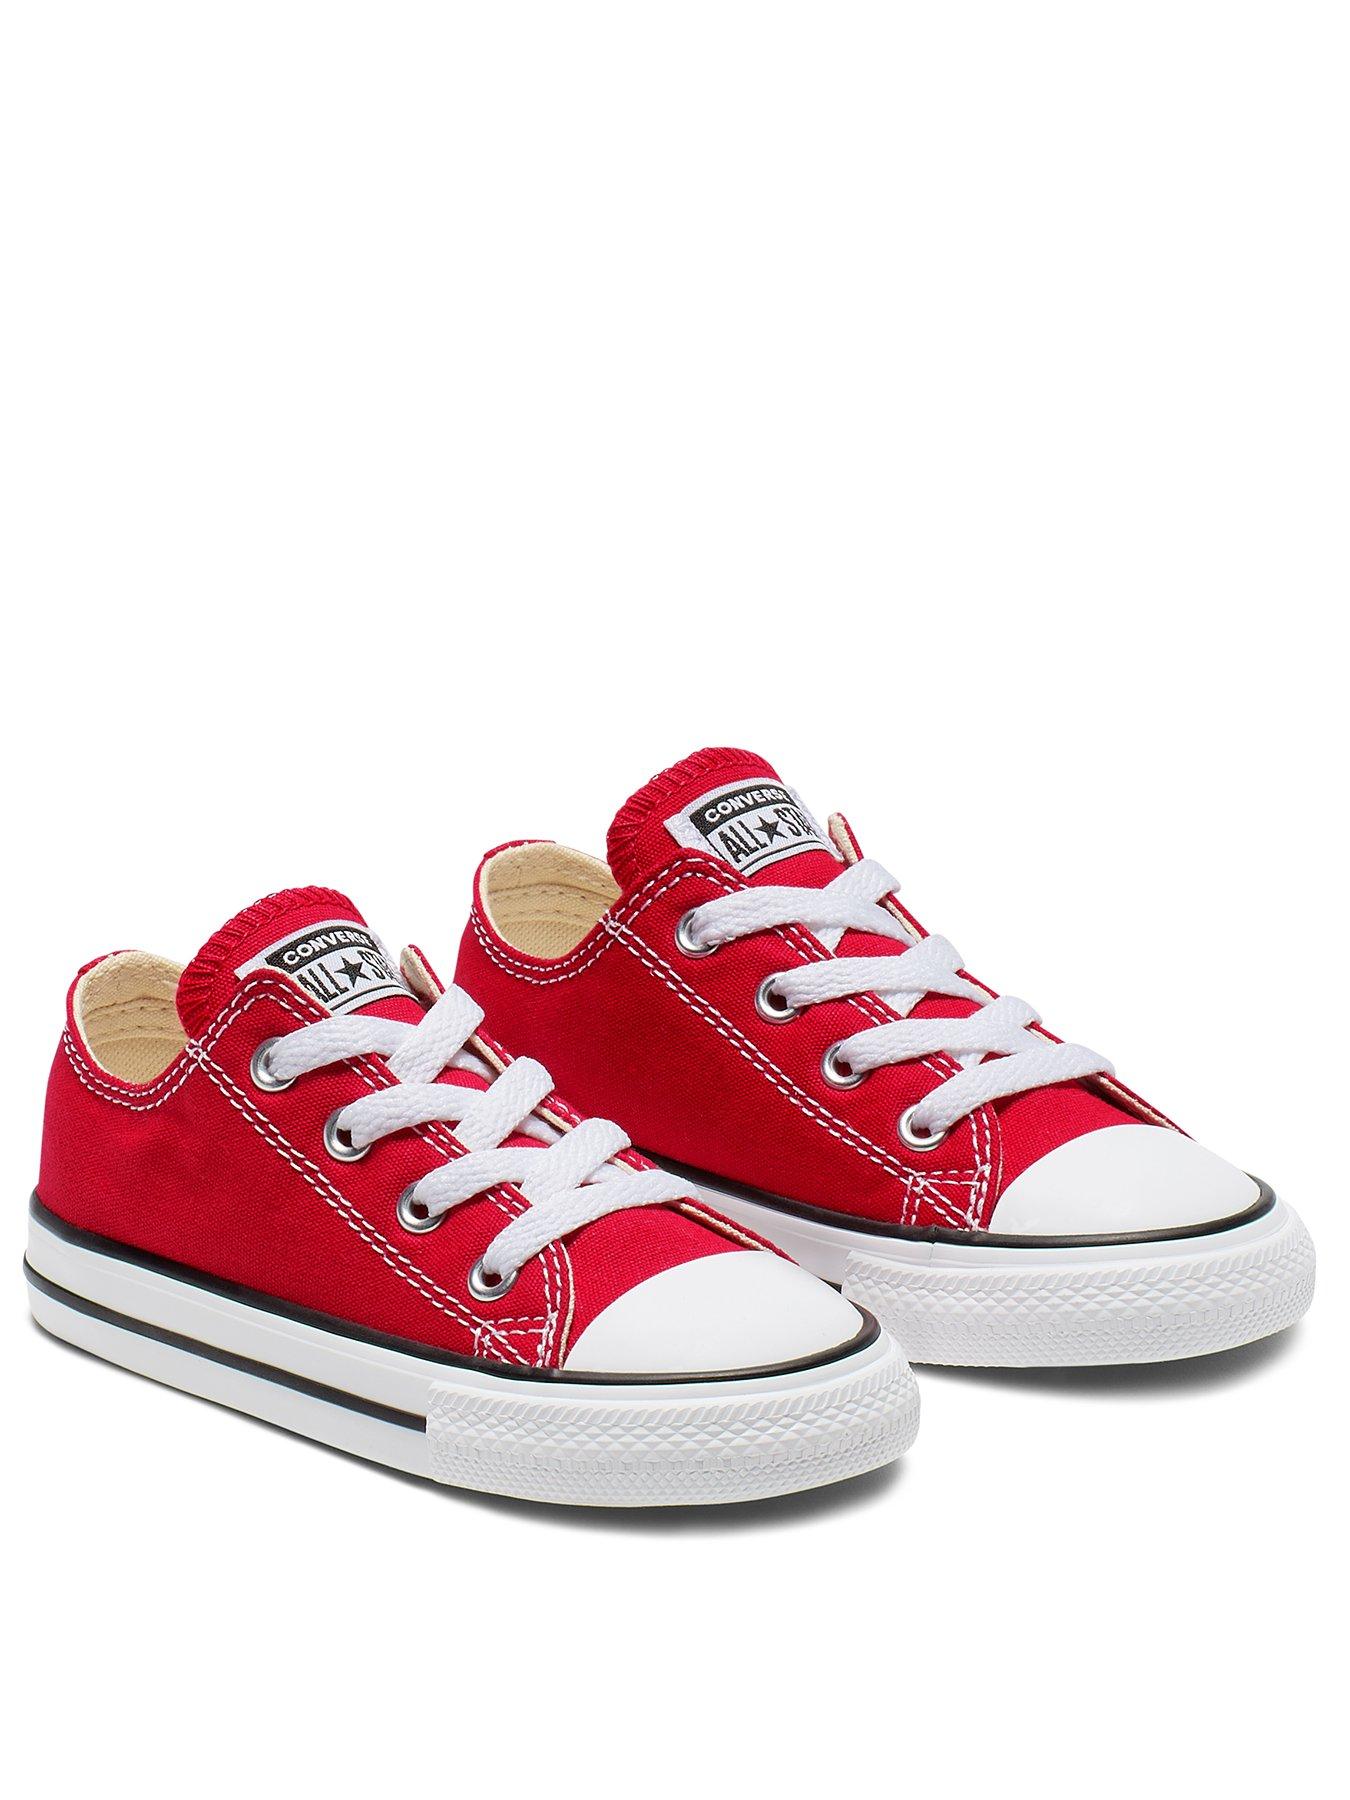 converse infant trainers